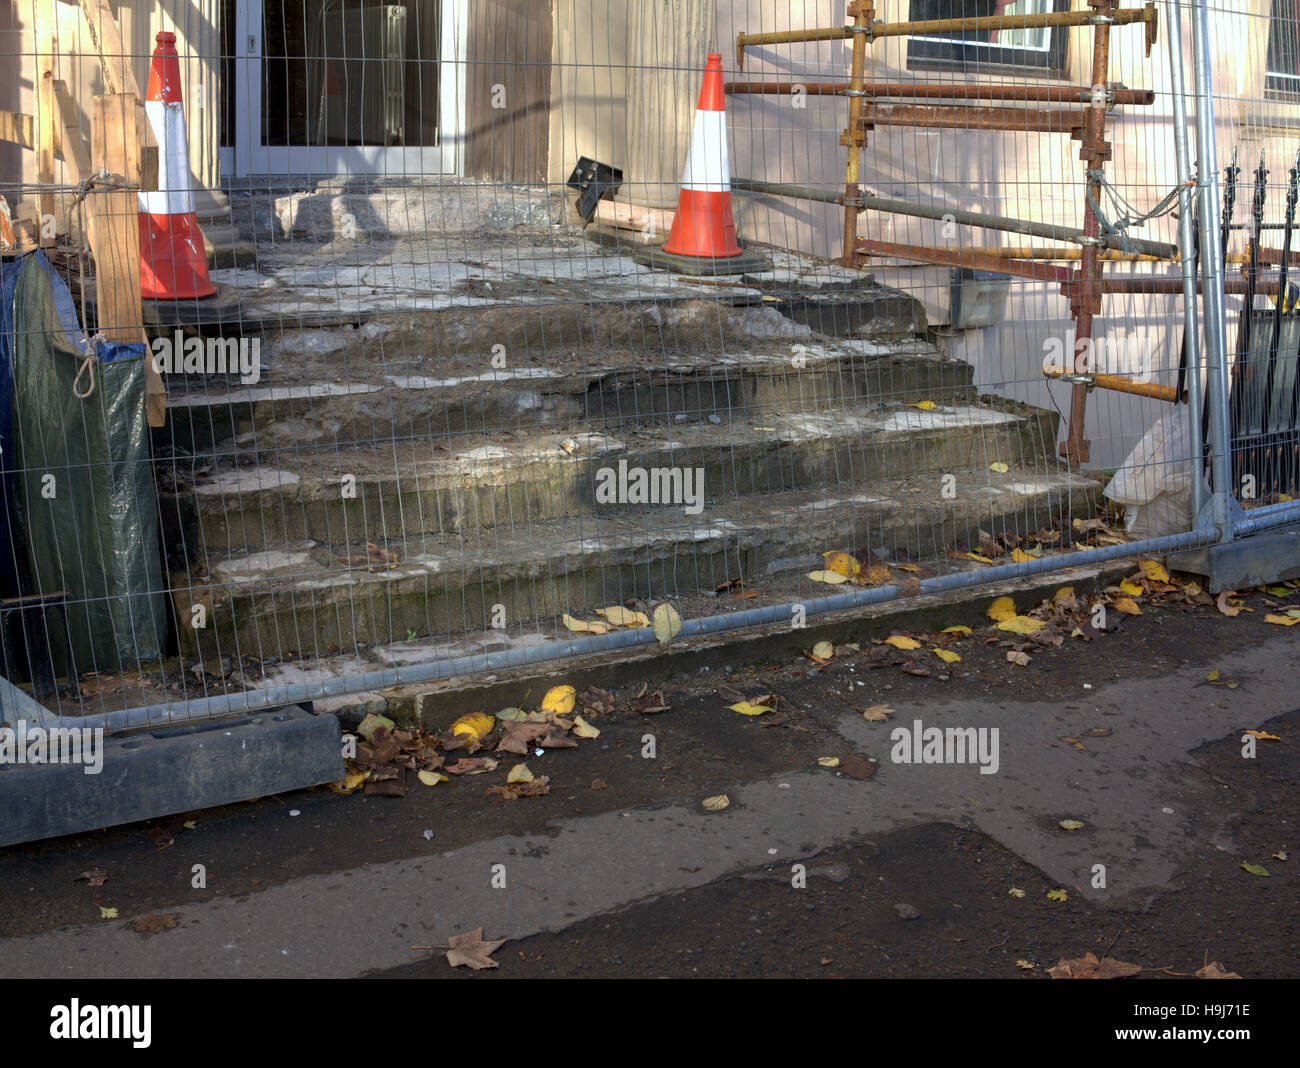 health and safety dangerous stairs damaged broken Stock Photo